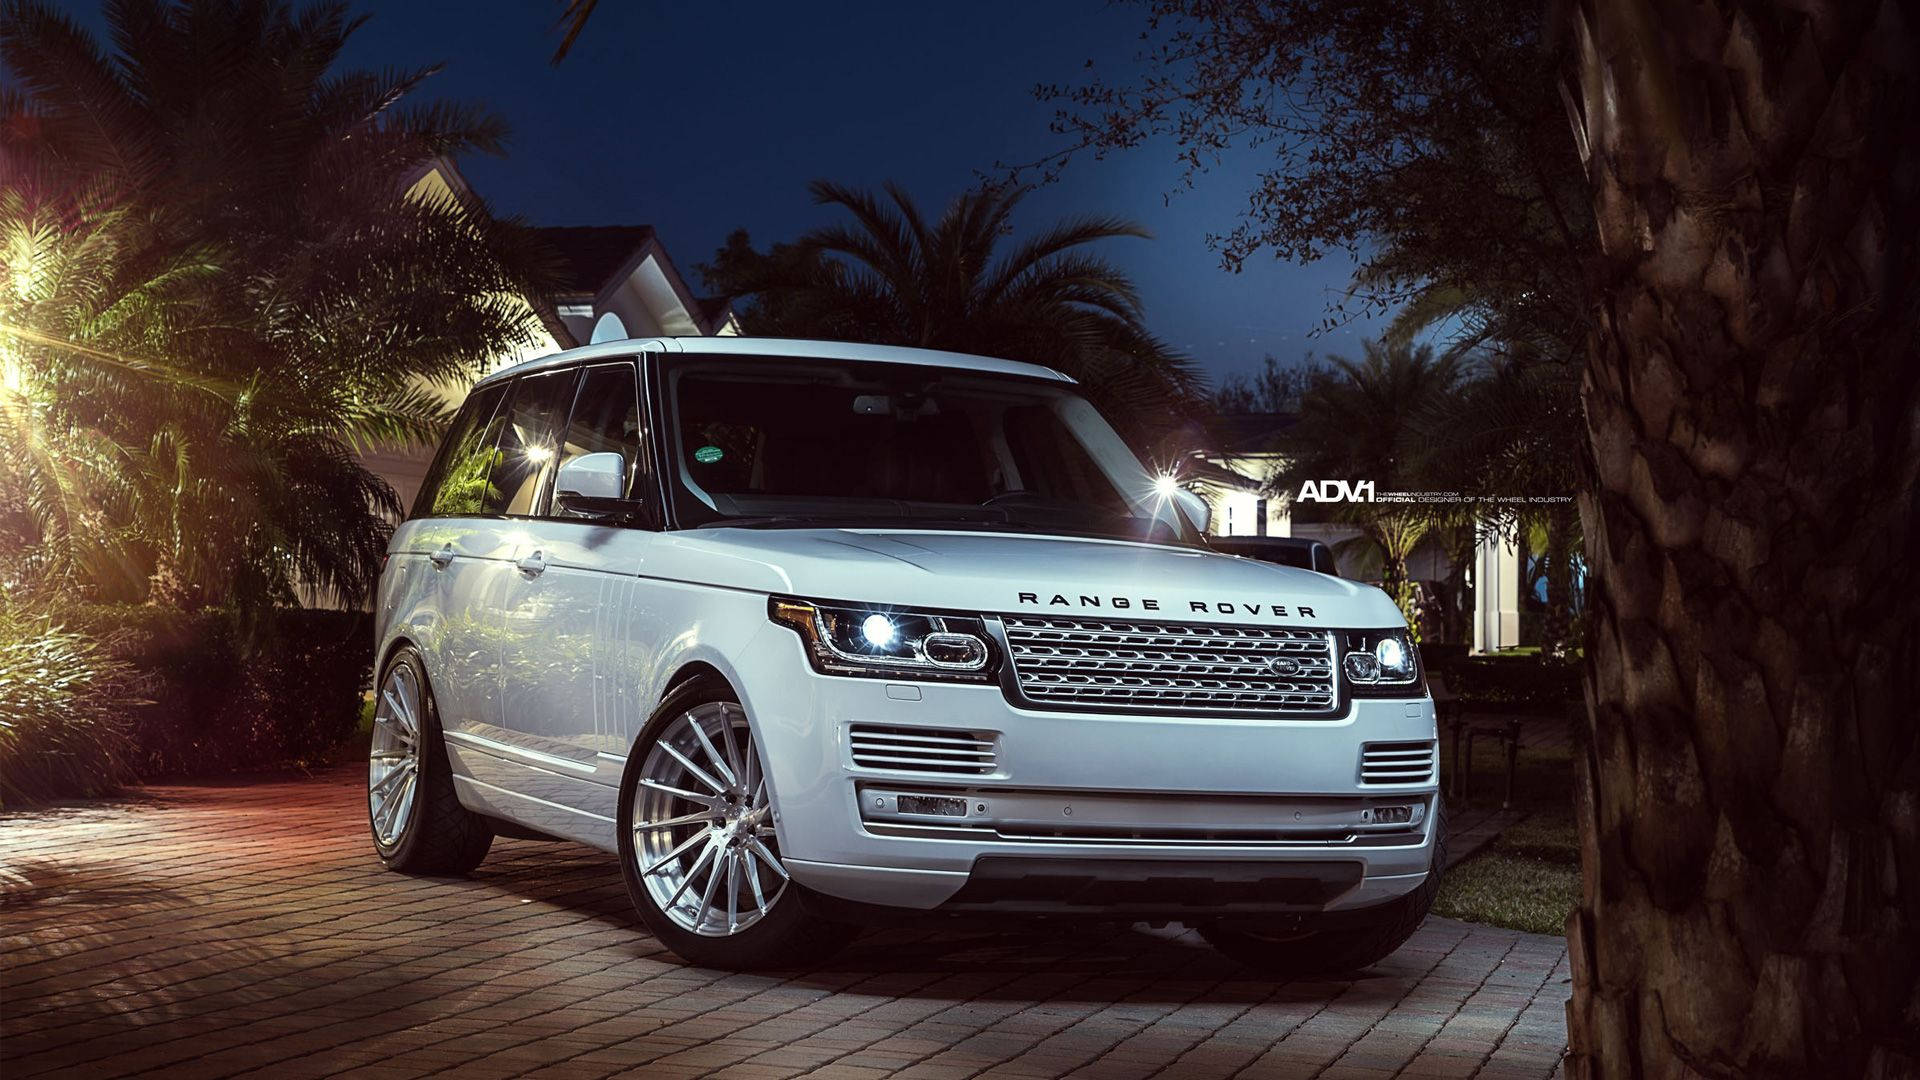 "See the Luxury of the Land Rover in Action" Wallpaper